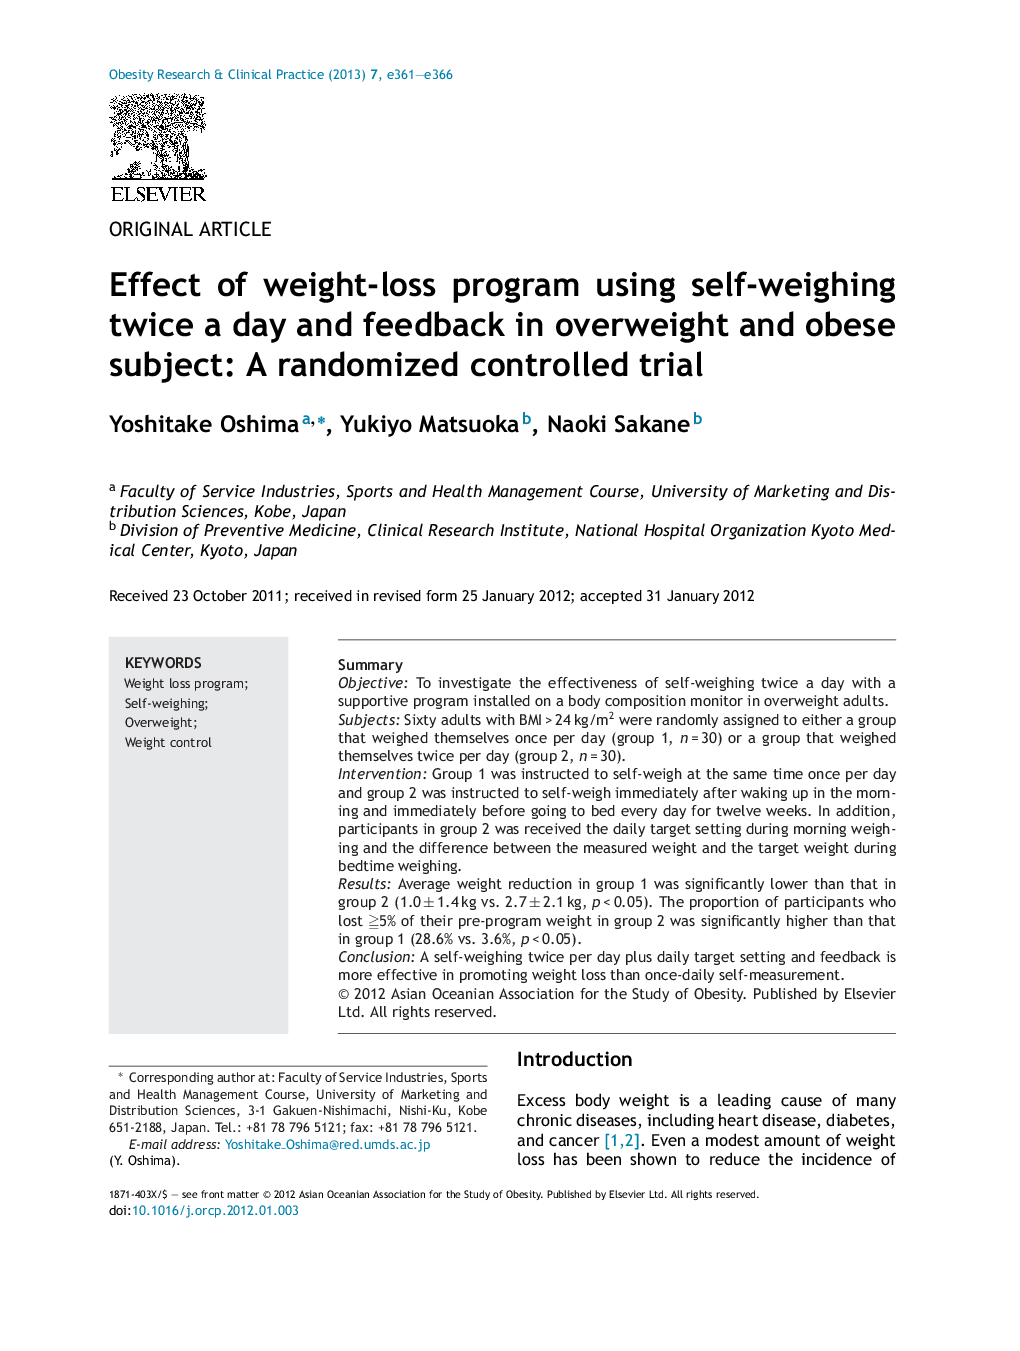 Effect of weight-loss program using self-weighing twice a day and feedback in overweight and obese subject: A randomized controlled trial